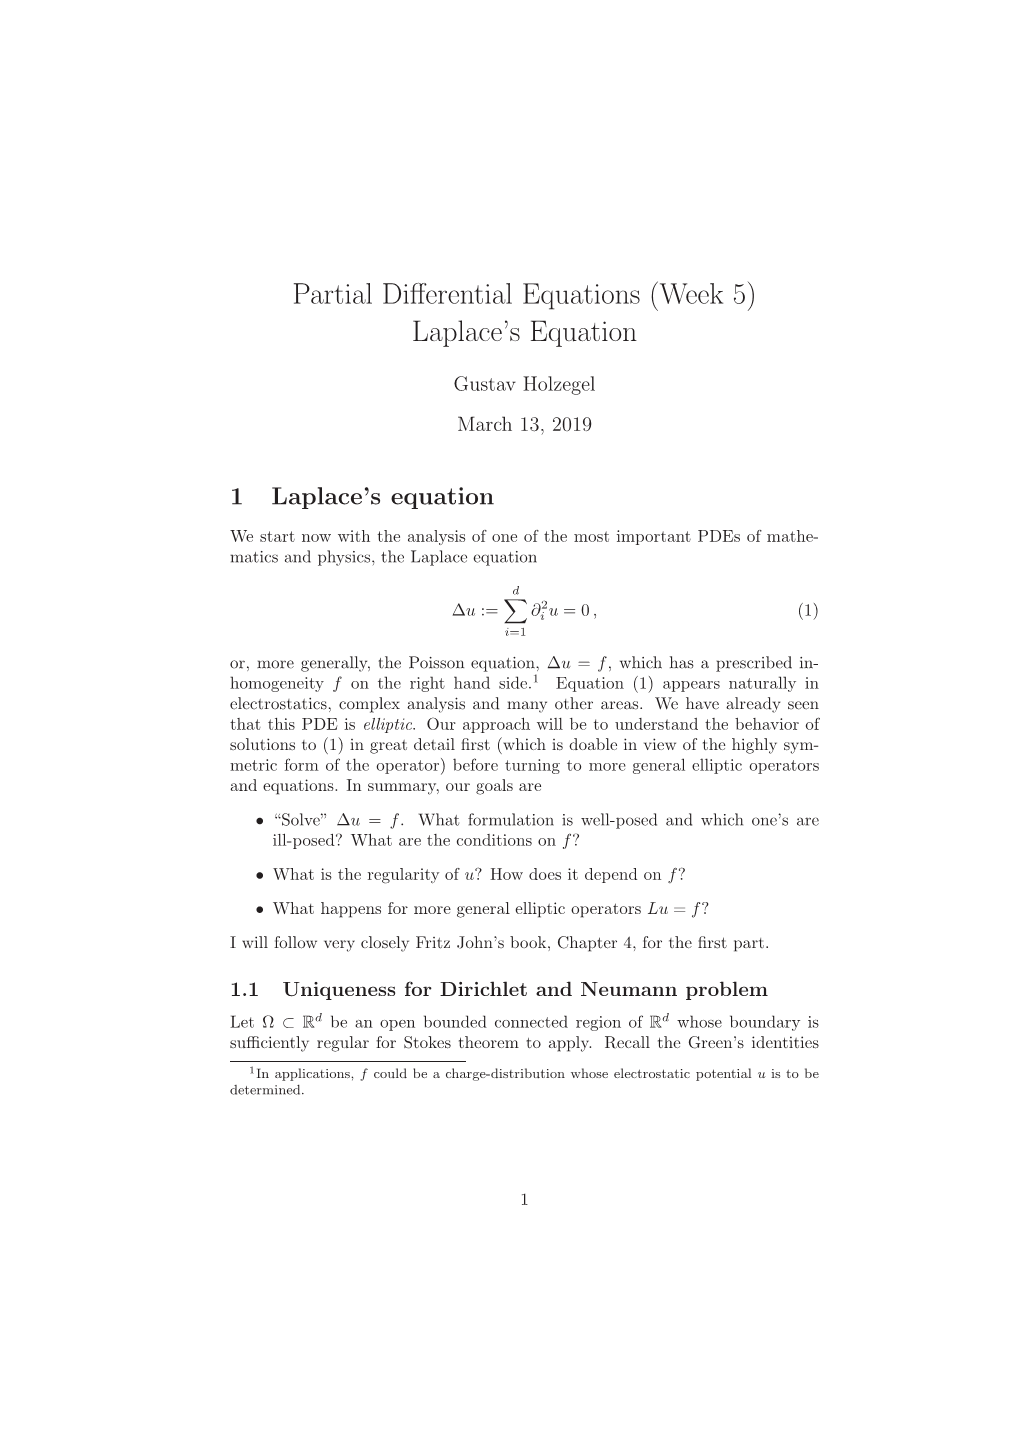 Partial Differential Equations (Week 5) Laplace's Equation